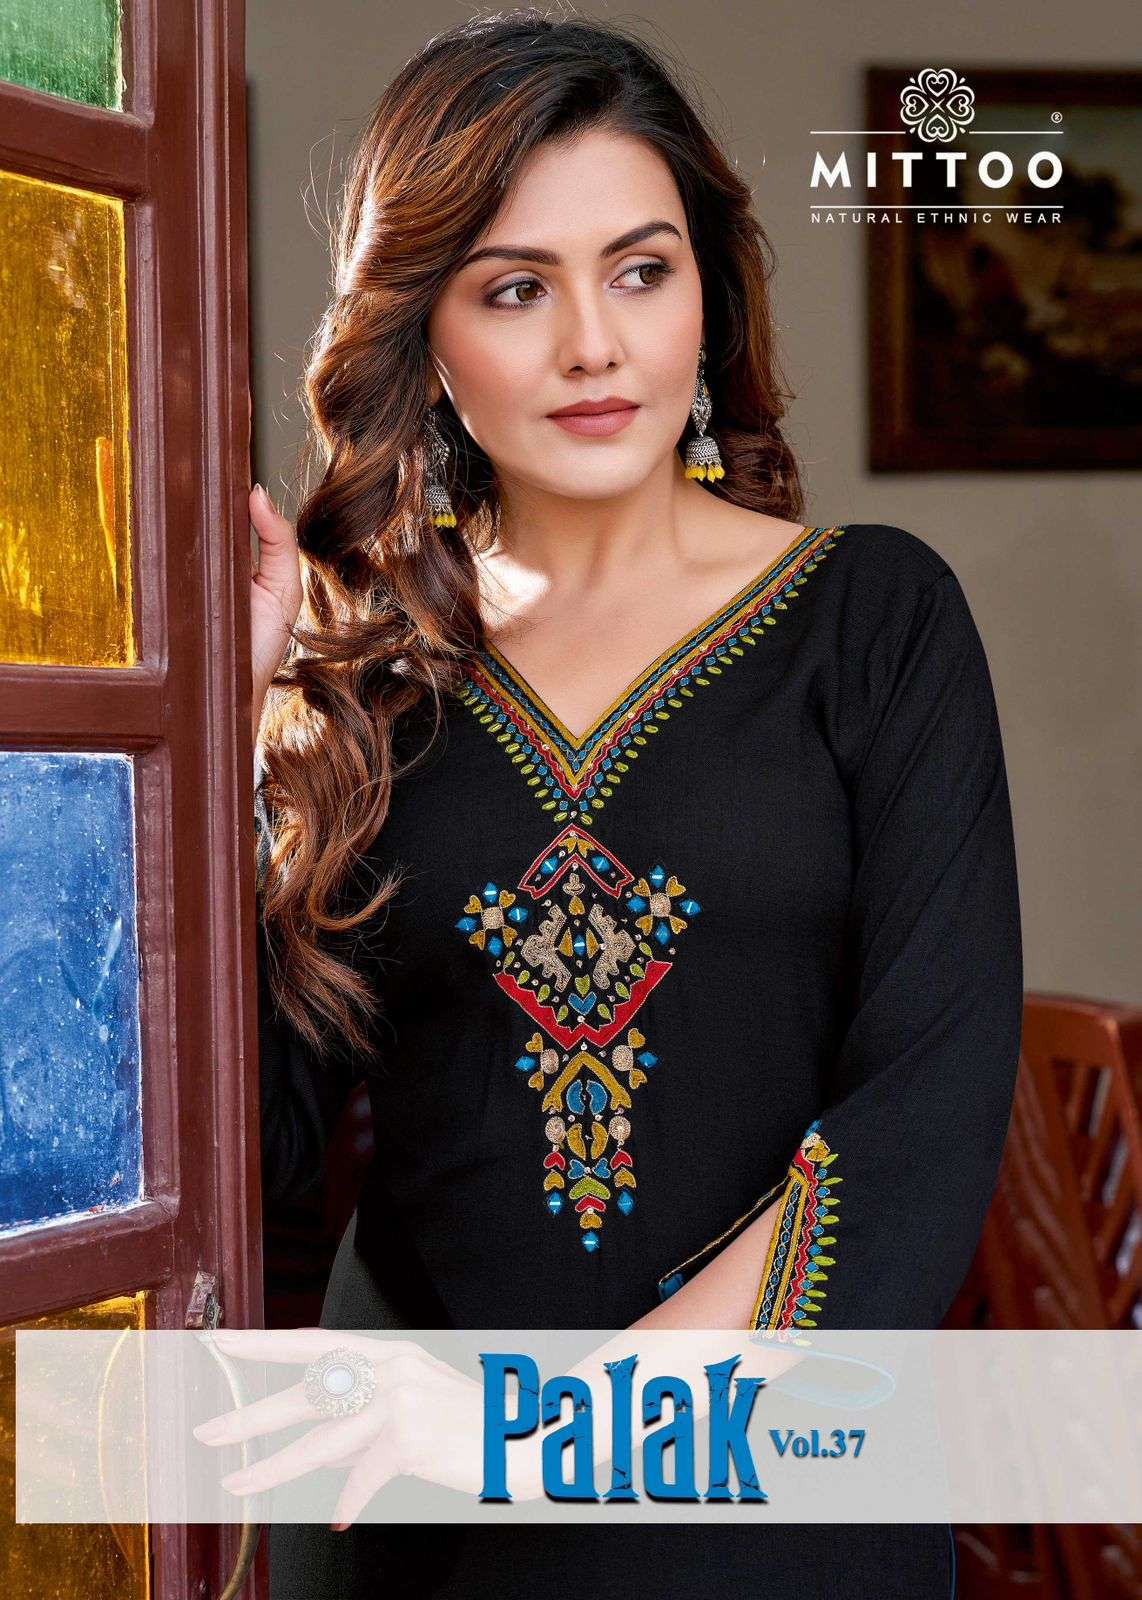 PALAK VOL 37 HEAVY RAYON EMBROIDERY AND HANDWORK KURTI BY MITTOO BRAND WHOLESALER AND DEALER